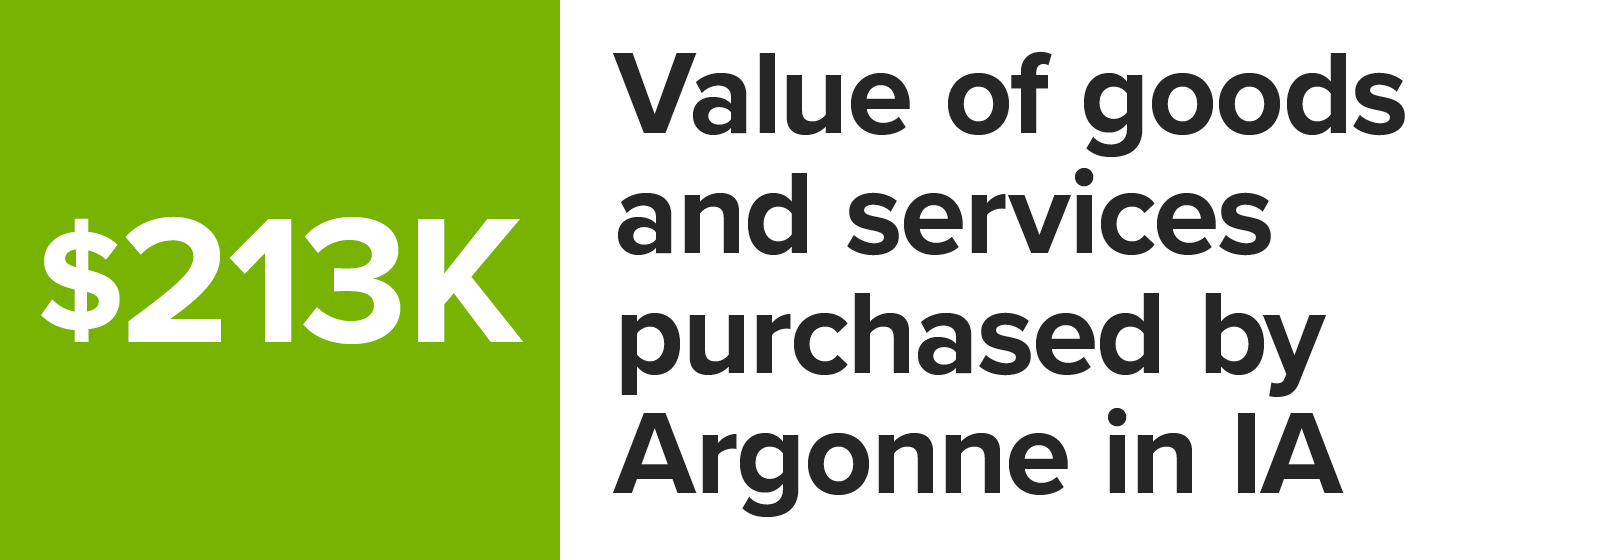 Number graphic value of goods and services purchased by Argonne in Iowa